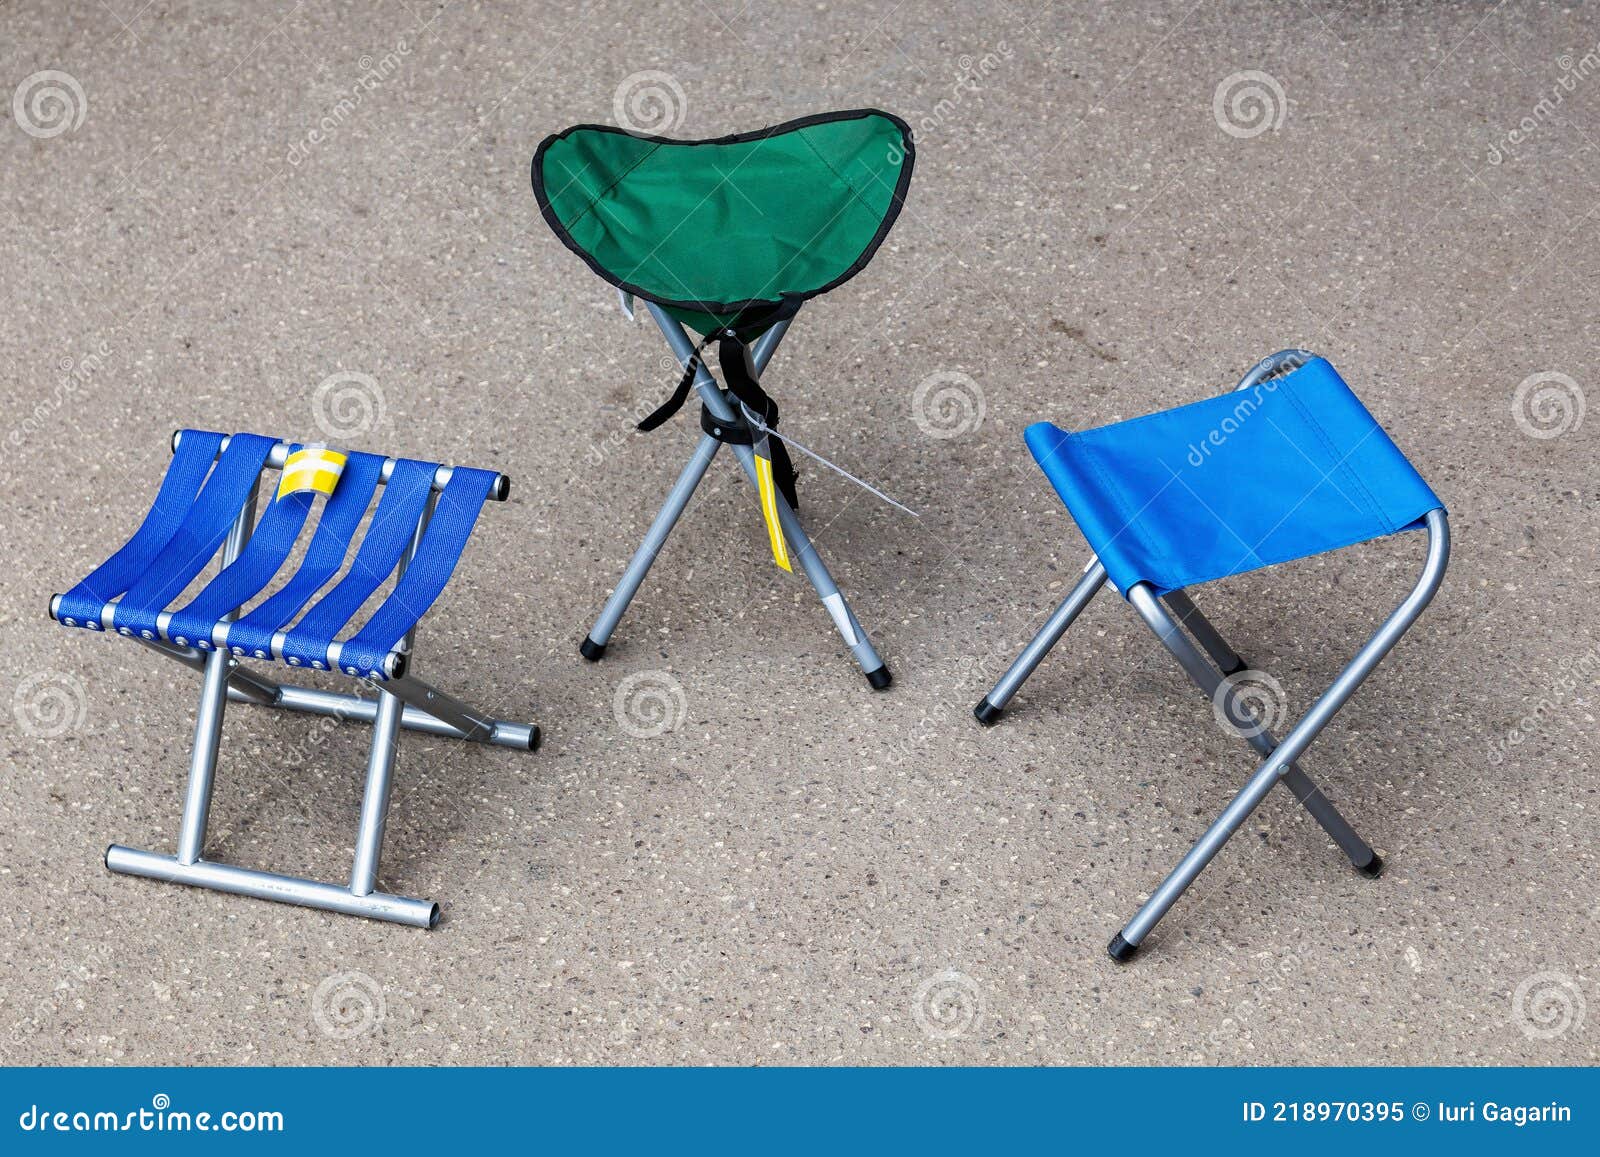 Folding Small Chairs for Outdoor Recreation. Fishing and Travel